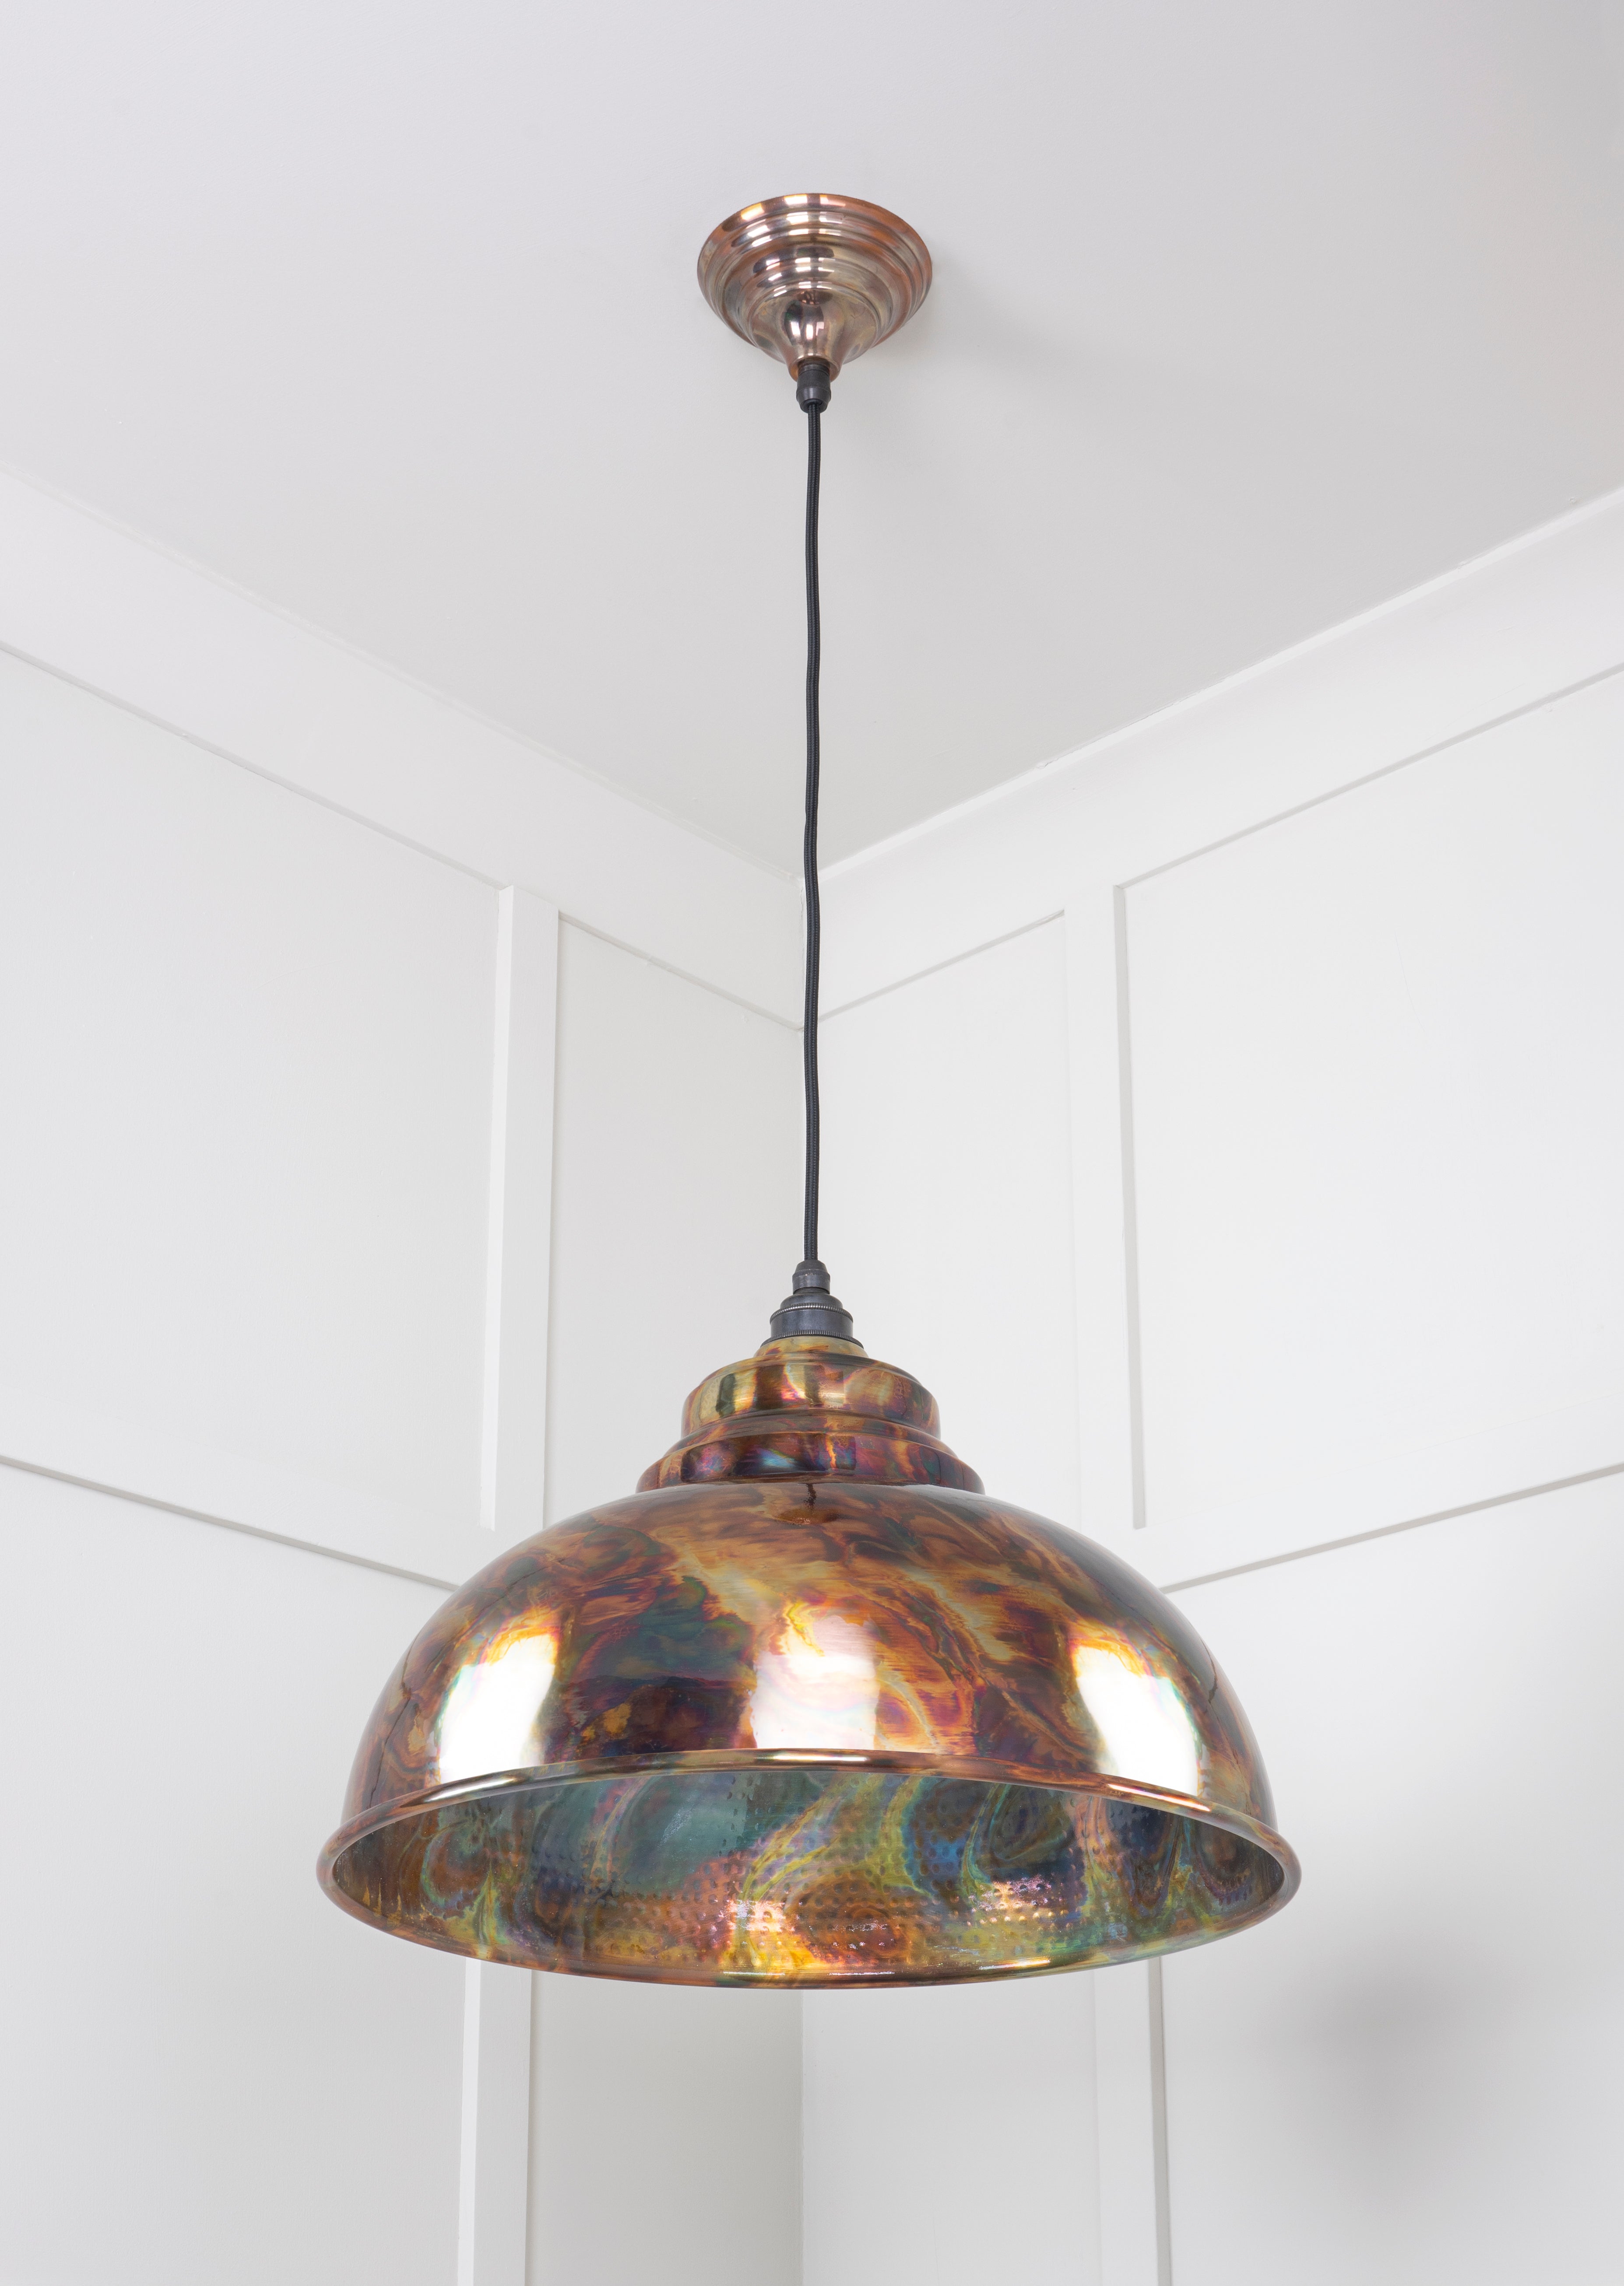 From the Anvil Burnished Harborne Pendant